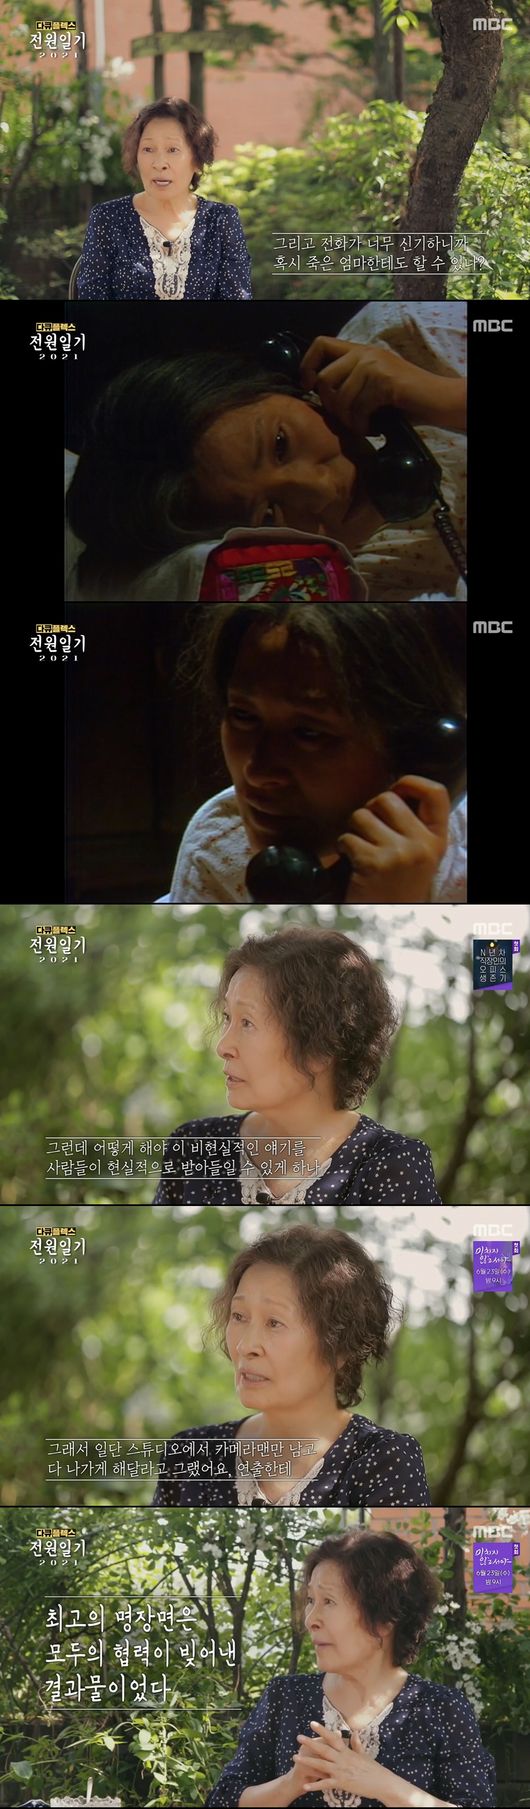 Actor Hye-ja Kim recalls filming power diary phone episodeIn MBCs 60th anniversary special feature Docuplex Diary 2021 broadcasted on the 18th, Hye-ja Kim recalled the phone scene that is considered as a famous scene.On this day, Bul-am Choi met Kim Jong-su, who wrote The Power Diary.When Bul-am Choi saw Kim Jong-su, he laughed, Have you gone backwards for the years? The two shared a warm meal like 20 years ago.Youve been writing since late 81, and it was all masterpieces, it was like looking at someone elses home room; all the gods that came out for a while were impressed, said Bul-am Choi.I thought I planted one seed while I was writing over 500 times; it seems that it was passed on to viewers, the Kim Jong-su writer recalled.The Power Diary Actors voted for the 248th Telephone episode as the best broadcast.Go Doo-shim recalled, I would have lined up a pay phone to call my mother from all over the country after watching the broadcast.Kims wife, Lee Eun-shim, played by Hye-ja Kim at the time, came out with a screen that called her mother in heaven, missing her dead mother.Hye-ja Kim said, I miss my mother so much because I got married early. I am so strange that I want to call my dead mother because she is pure.Its really a dream, he said. I asked him to leave Cameraman at the studio.Many people in the studio were breathing for some scene. PD said, Many actors talked about the scene.Hye-ja Kim said, Who did you say? Go Doo-shim thank you.Kim Jong-su writes, It was just after Mr. Hye-ja Kims mother died, I wanted to give something of comfort.My best friend and Hye-ja Kim were the ones who inspired me, he said. I came home quickly to write it down in my notebook because I would not forget it when I met.